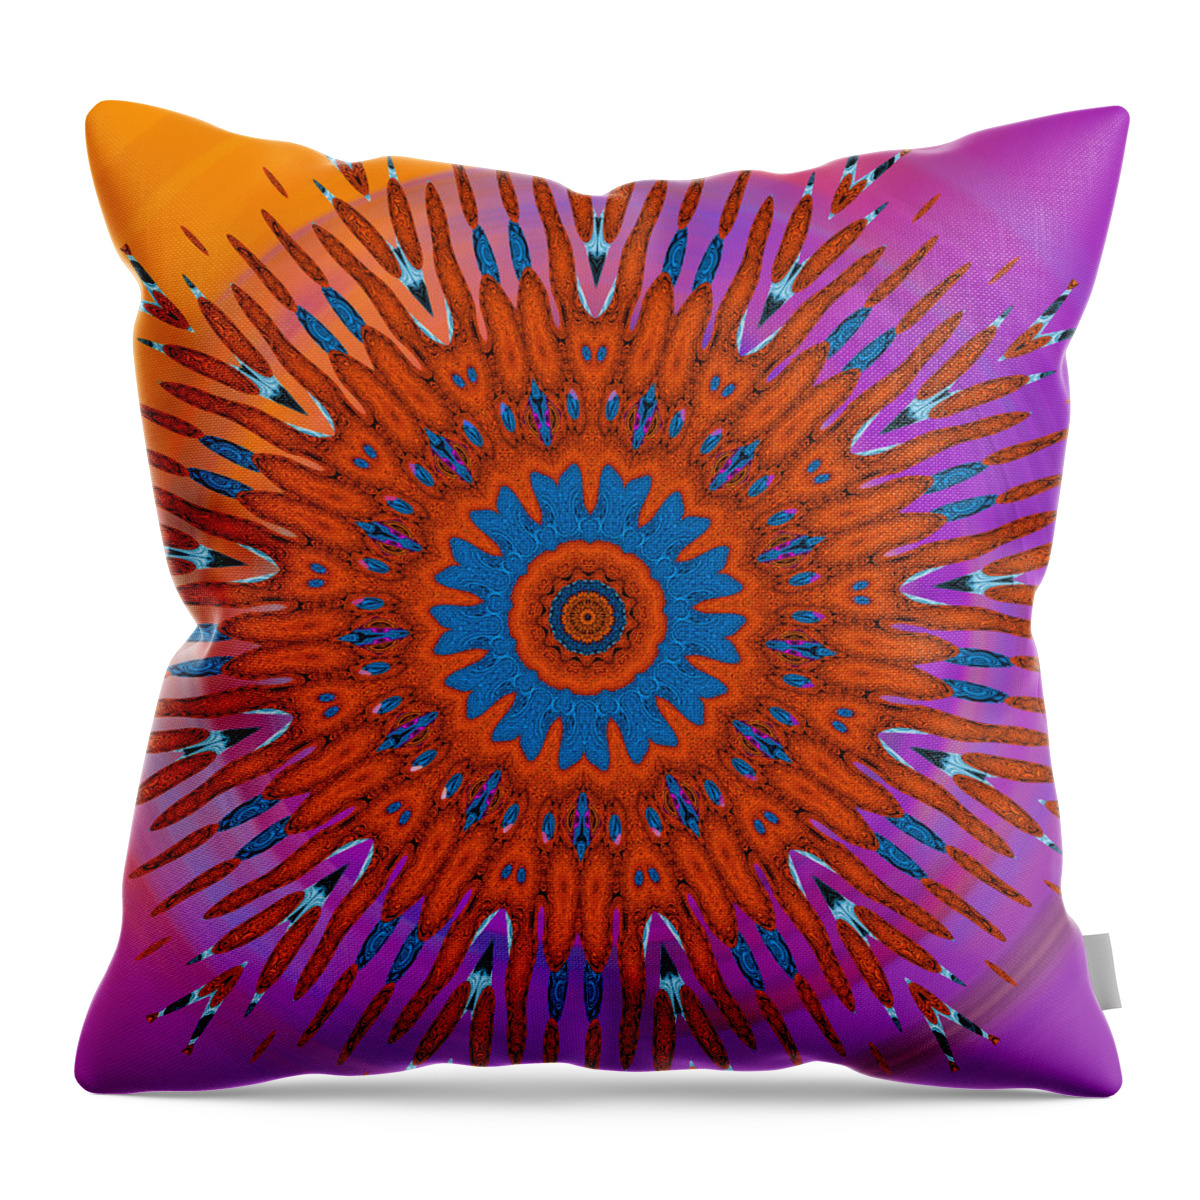 Abstract Throw Pillow featuring the digital art Retro 60's - Groovy Pinwheel by Ronald Mills